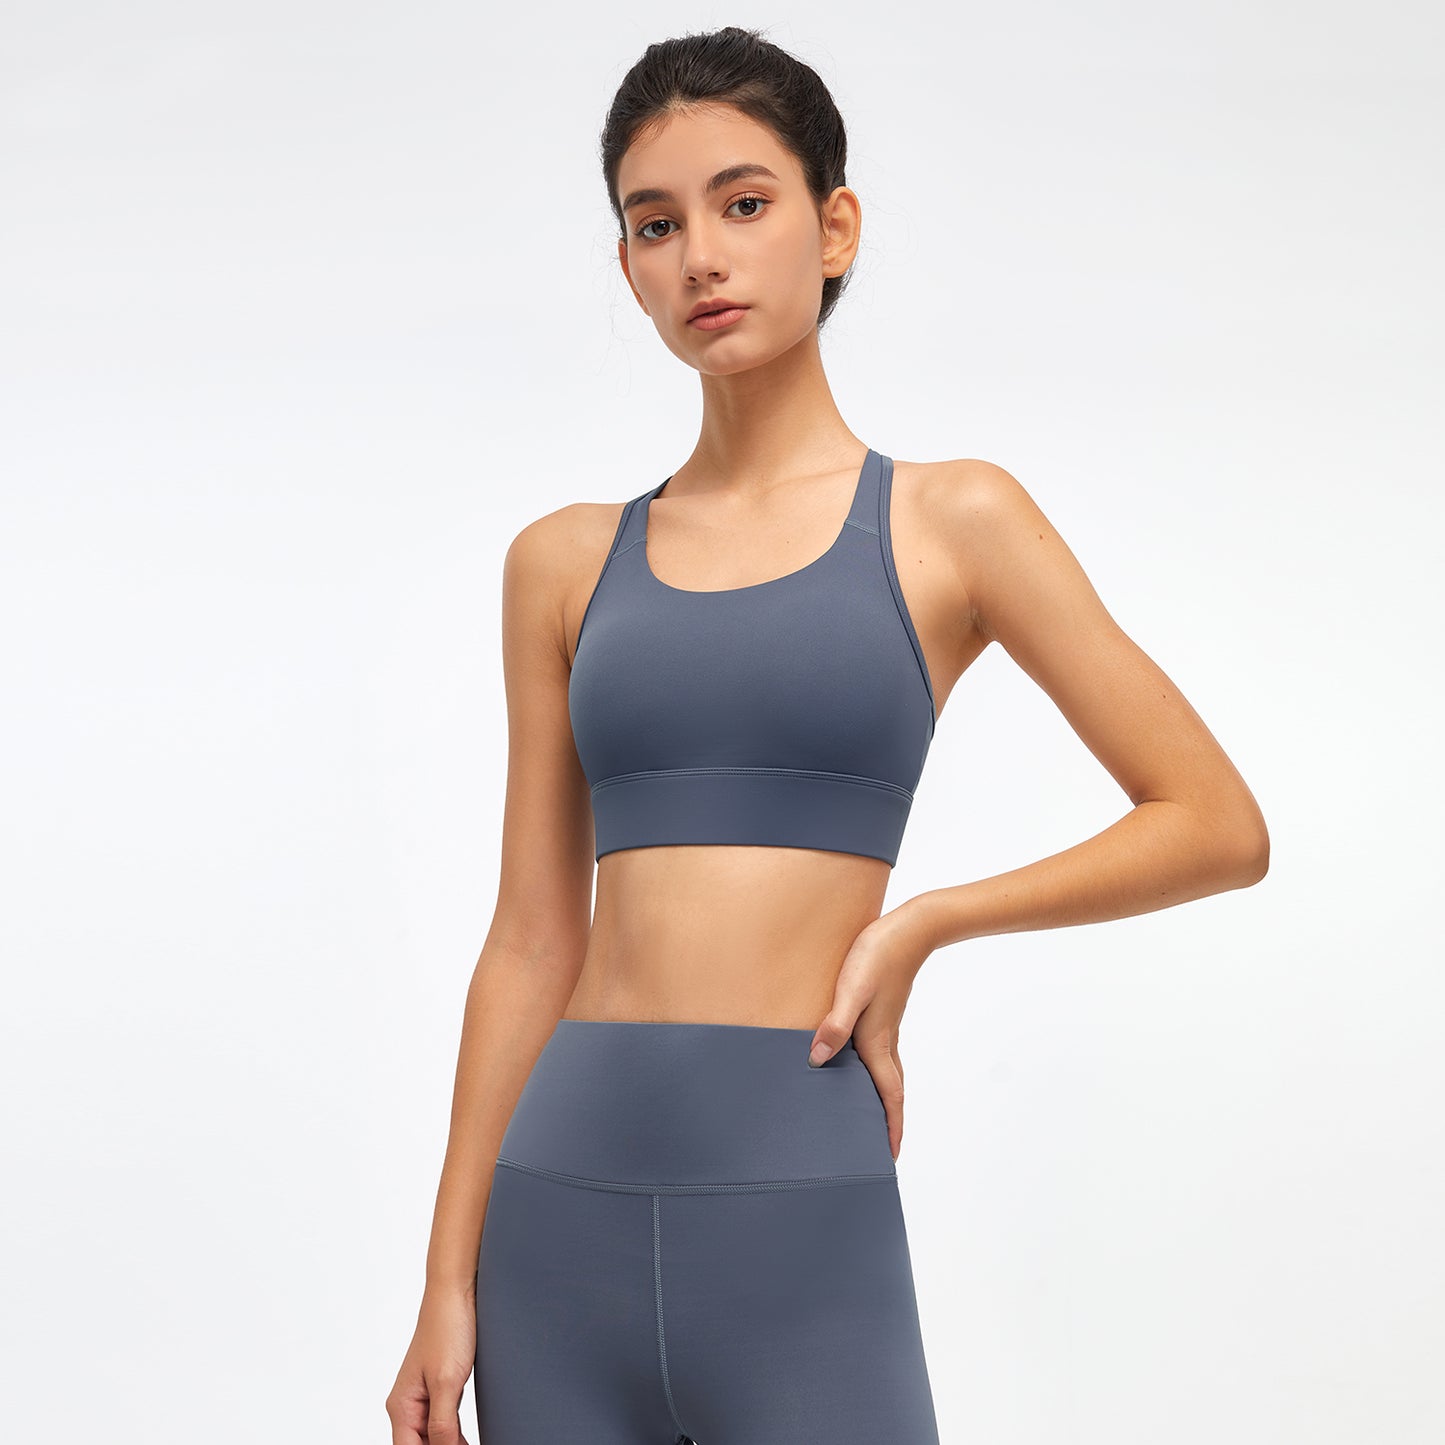 Women's Adjustable High Impact Shoulder Straps Yoga Tank Tops & Sports Bras is made from nylon and spandex breathable materials that are durable, quick-dry and have great stretchable abilities giving you a comfortable and flexible feel. Its suitable for jogging, yoga, gym and is comfortable for leisure wear.